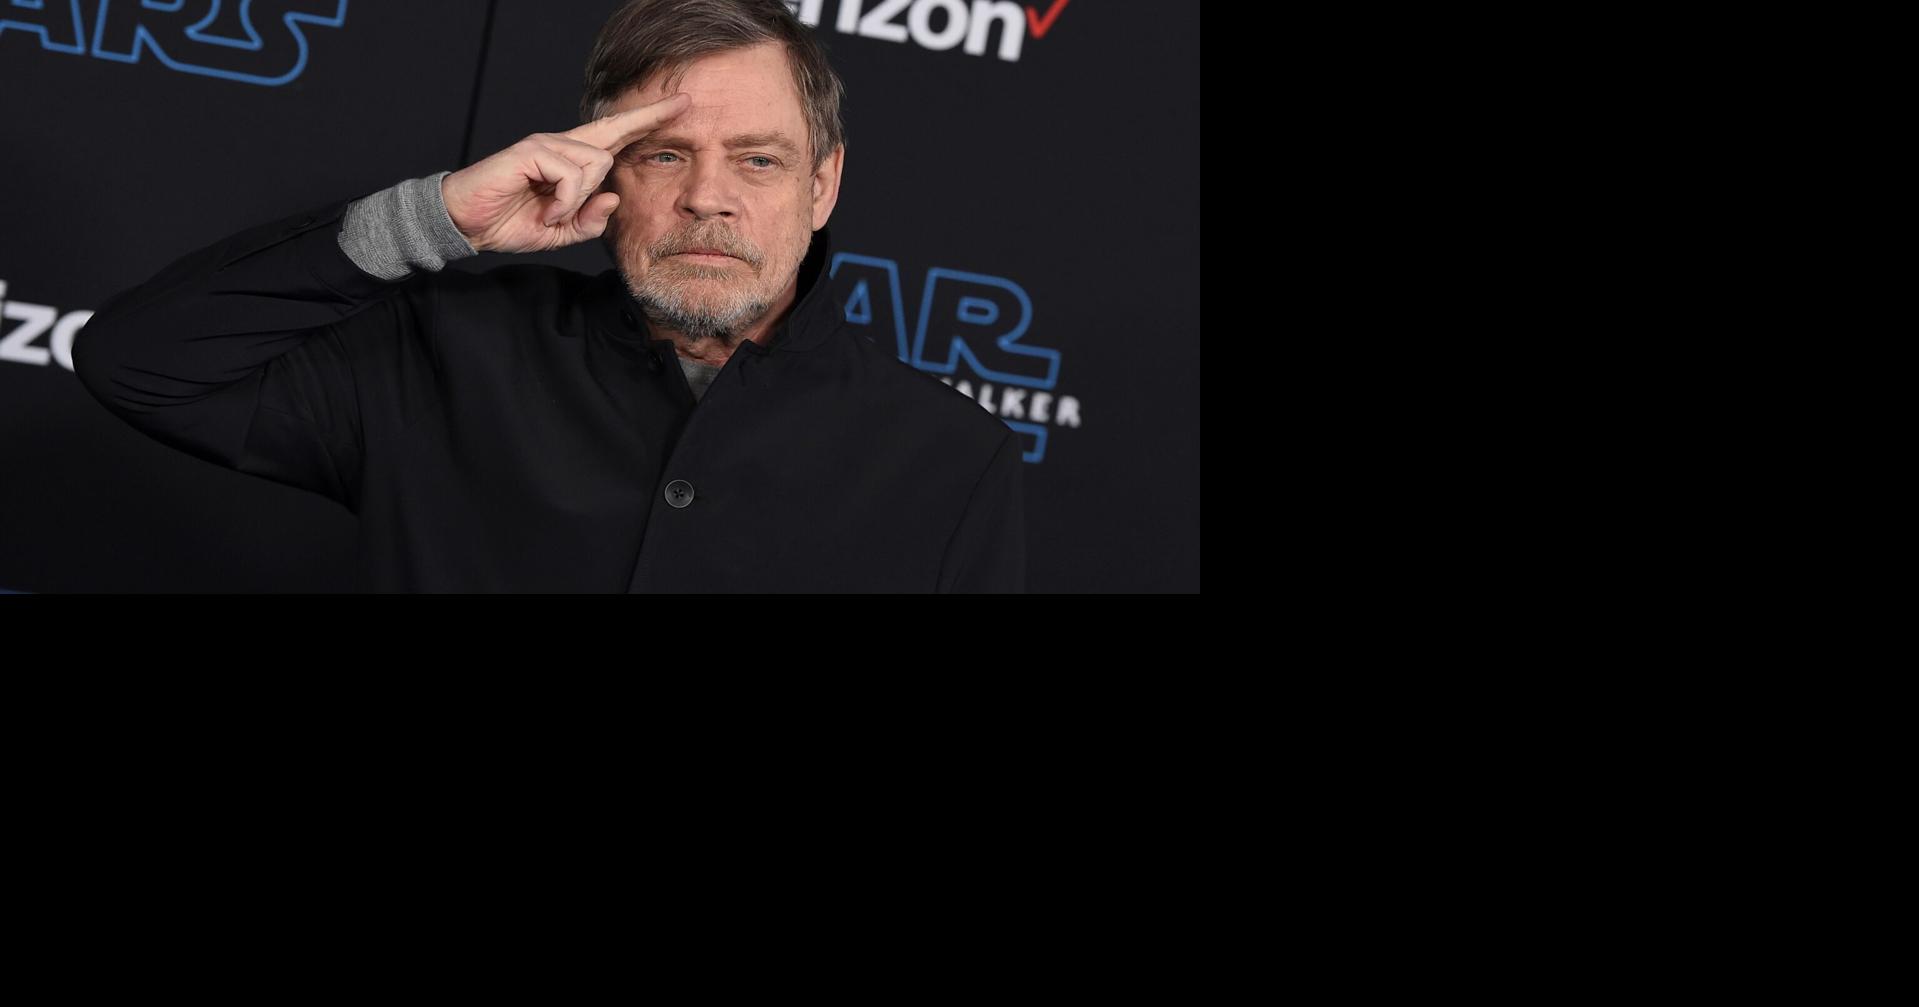 The astronomical amount Mark Hamill charged for 30 seconds in a